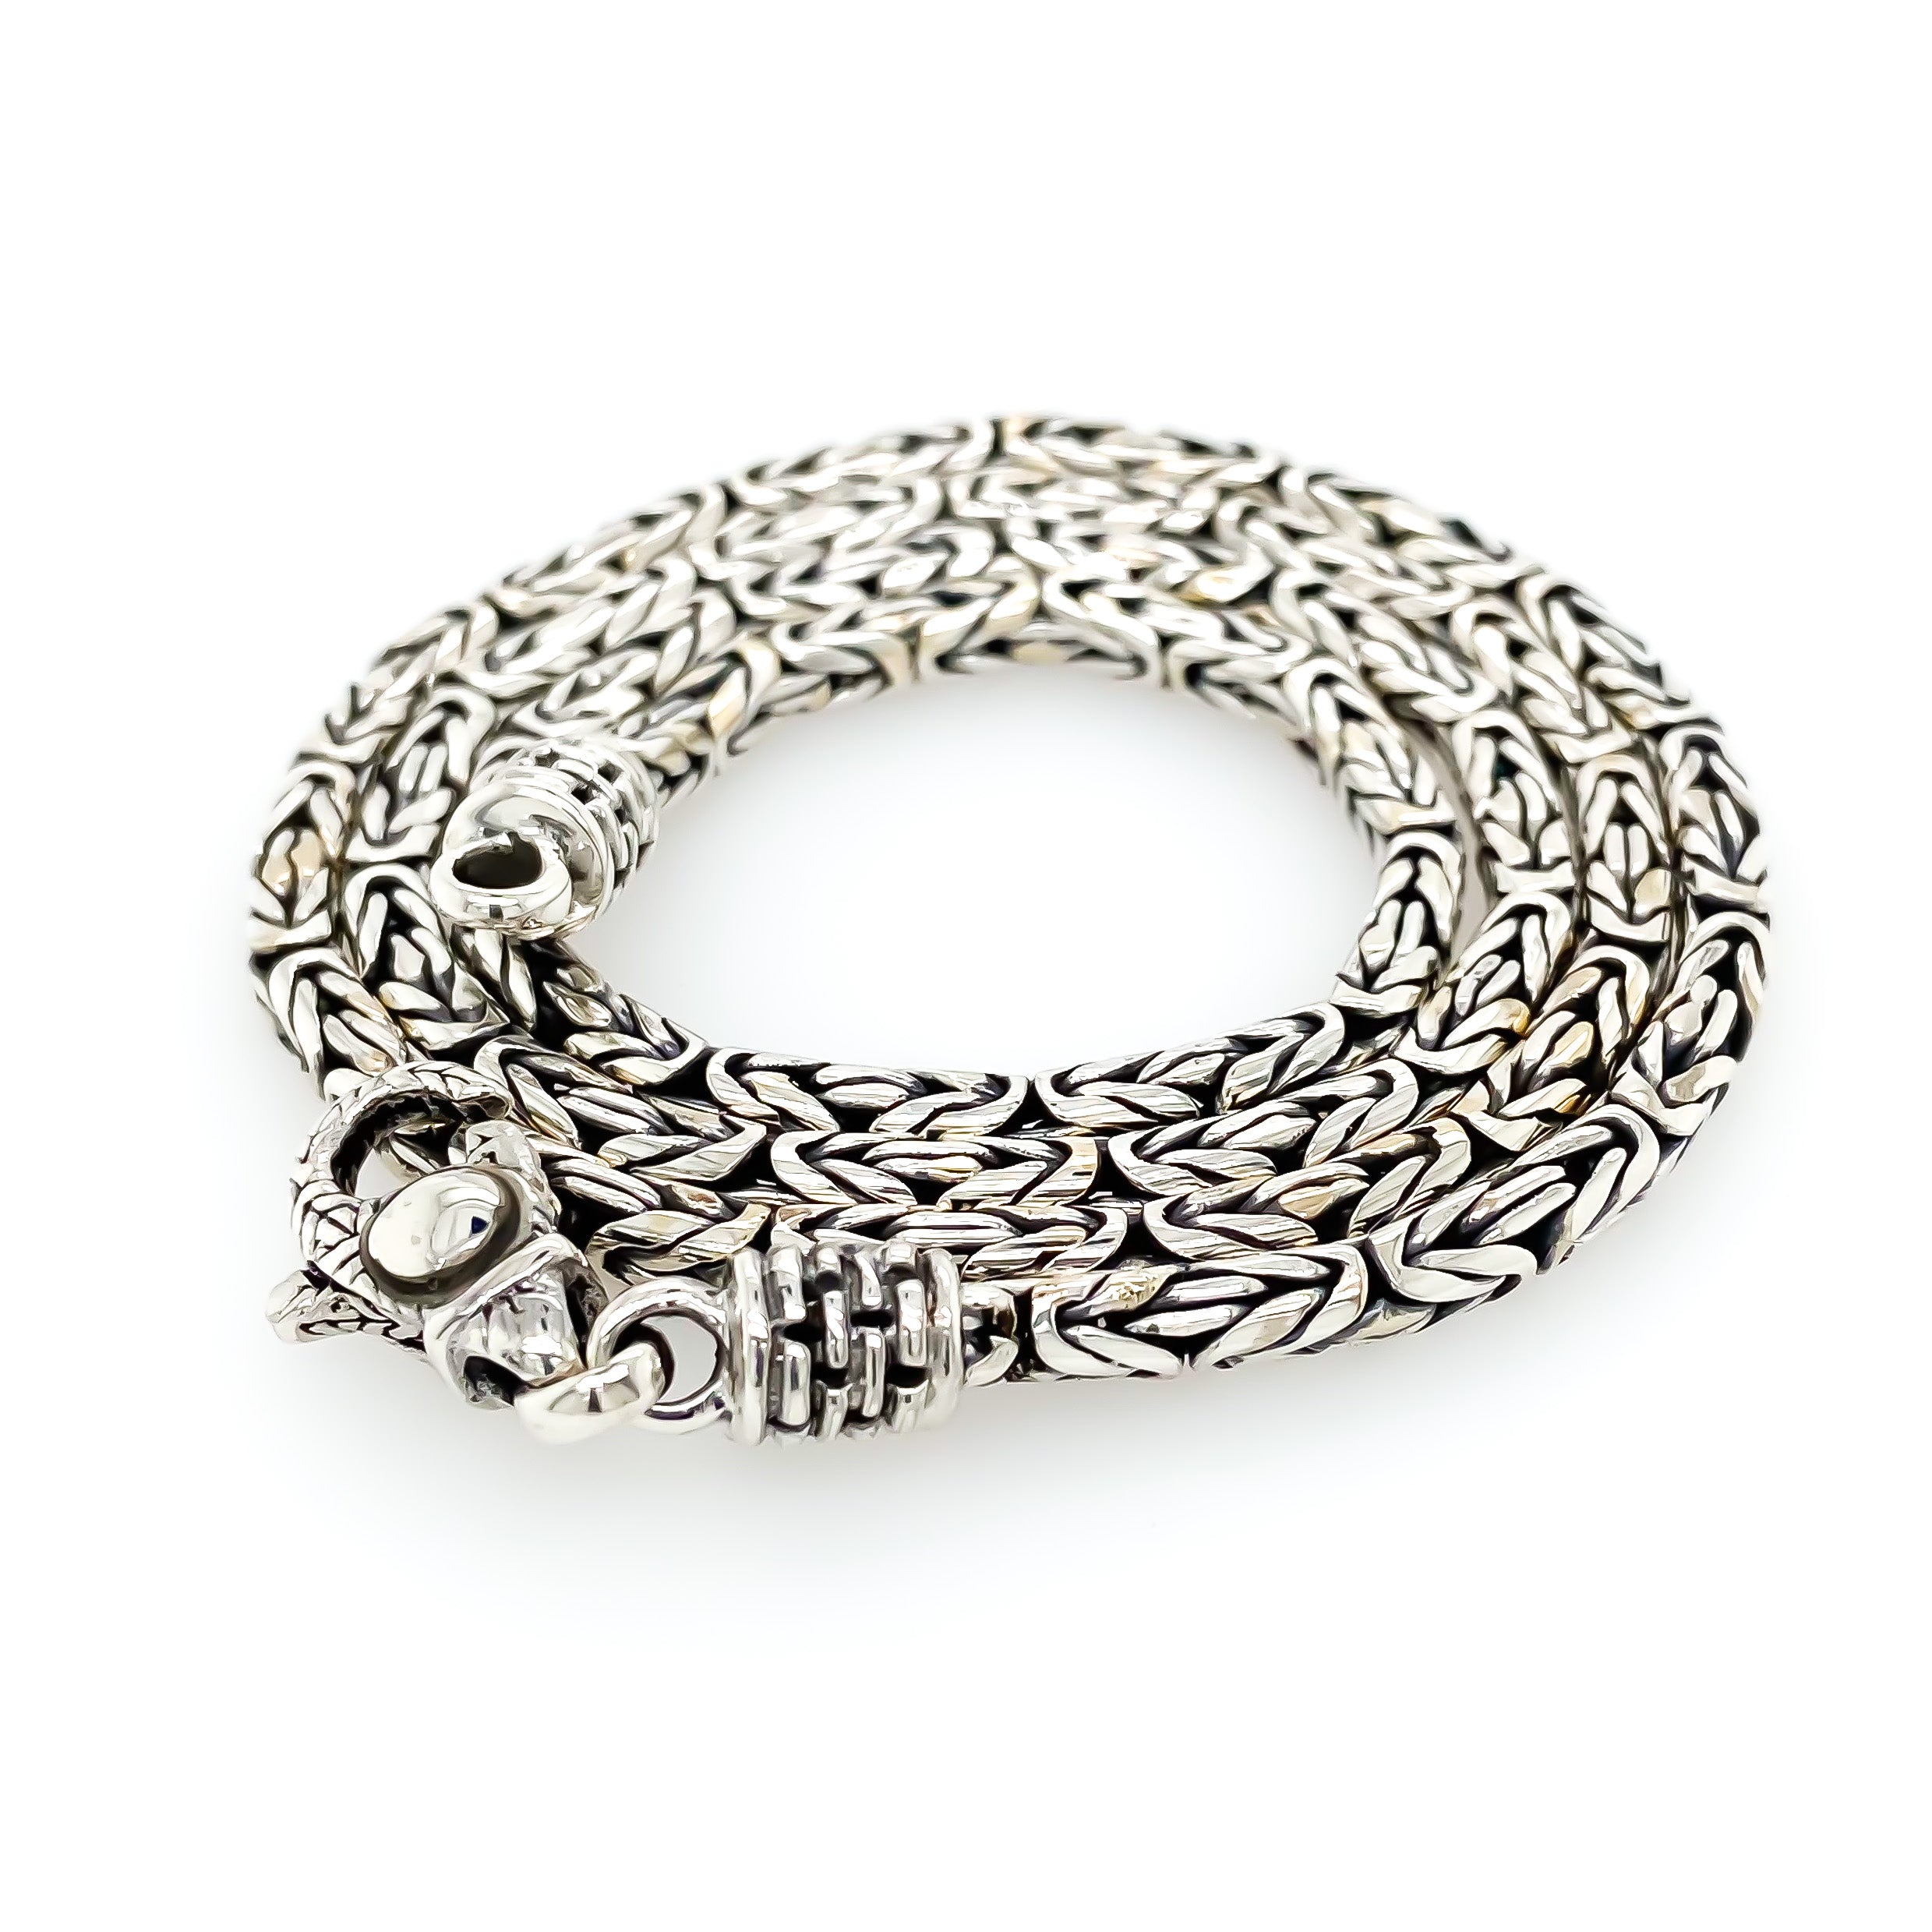 Sterling silver byzantine / foxtail unisex bracelet chain, 7 inch OR 1 -  South Paw Studios Handcrafted Designer Jewelry